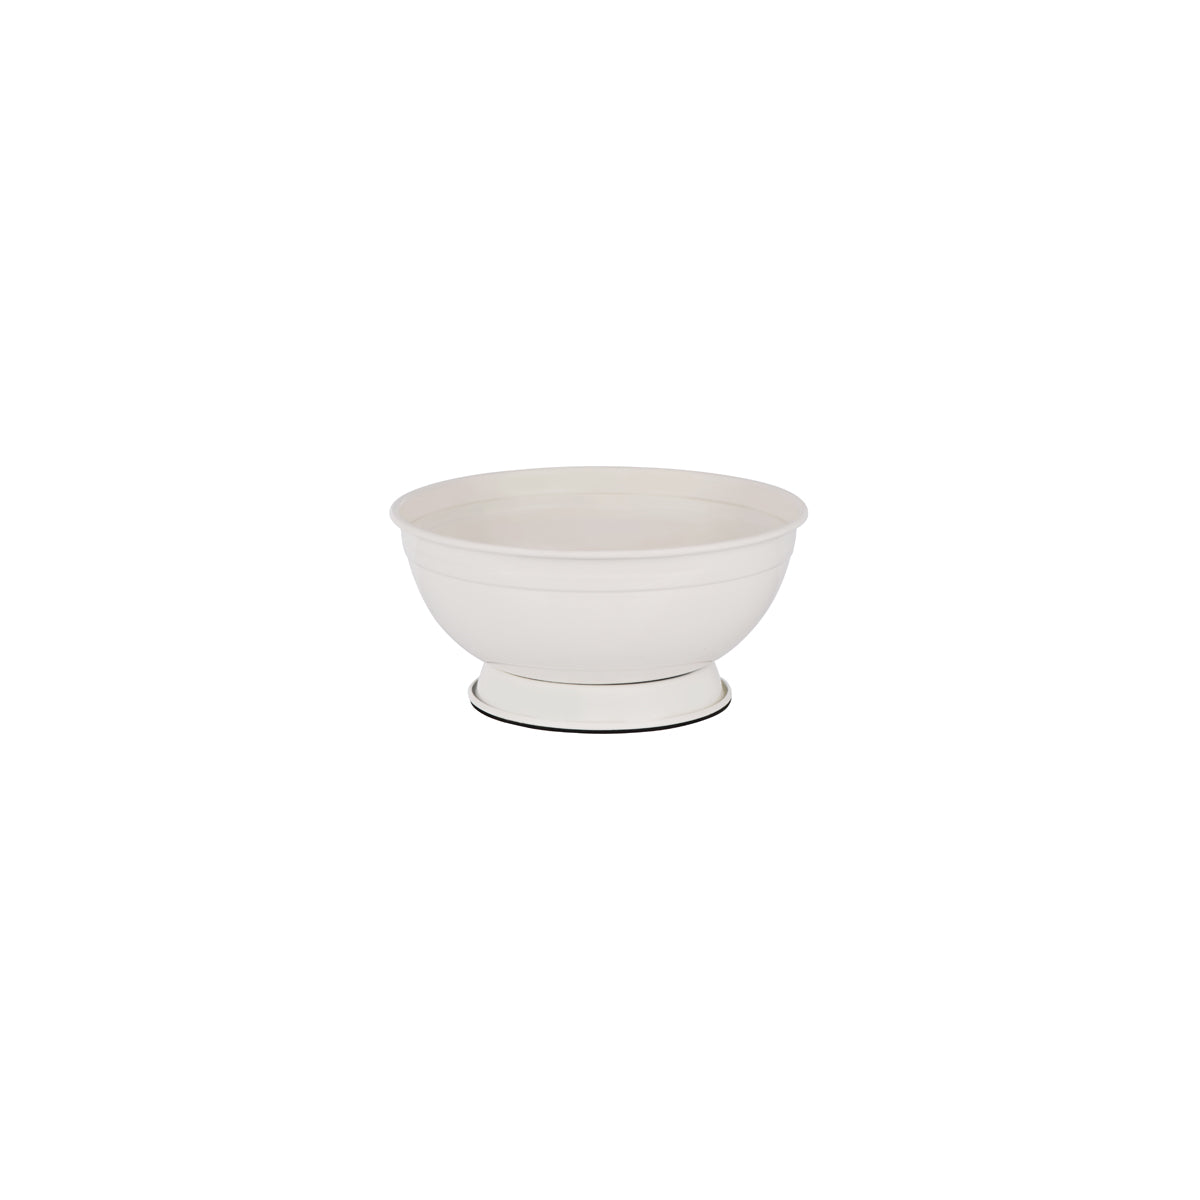 78820 Chef Inox Coney Island Creme Powder Coated Footed Serving Bowl 250x120mm Tomkin Australia Hospitality Supplies